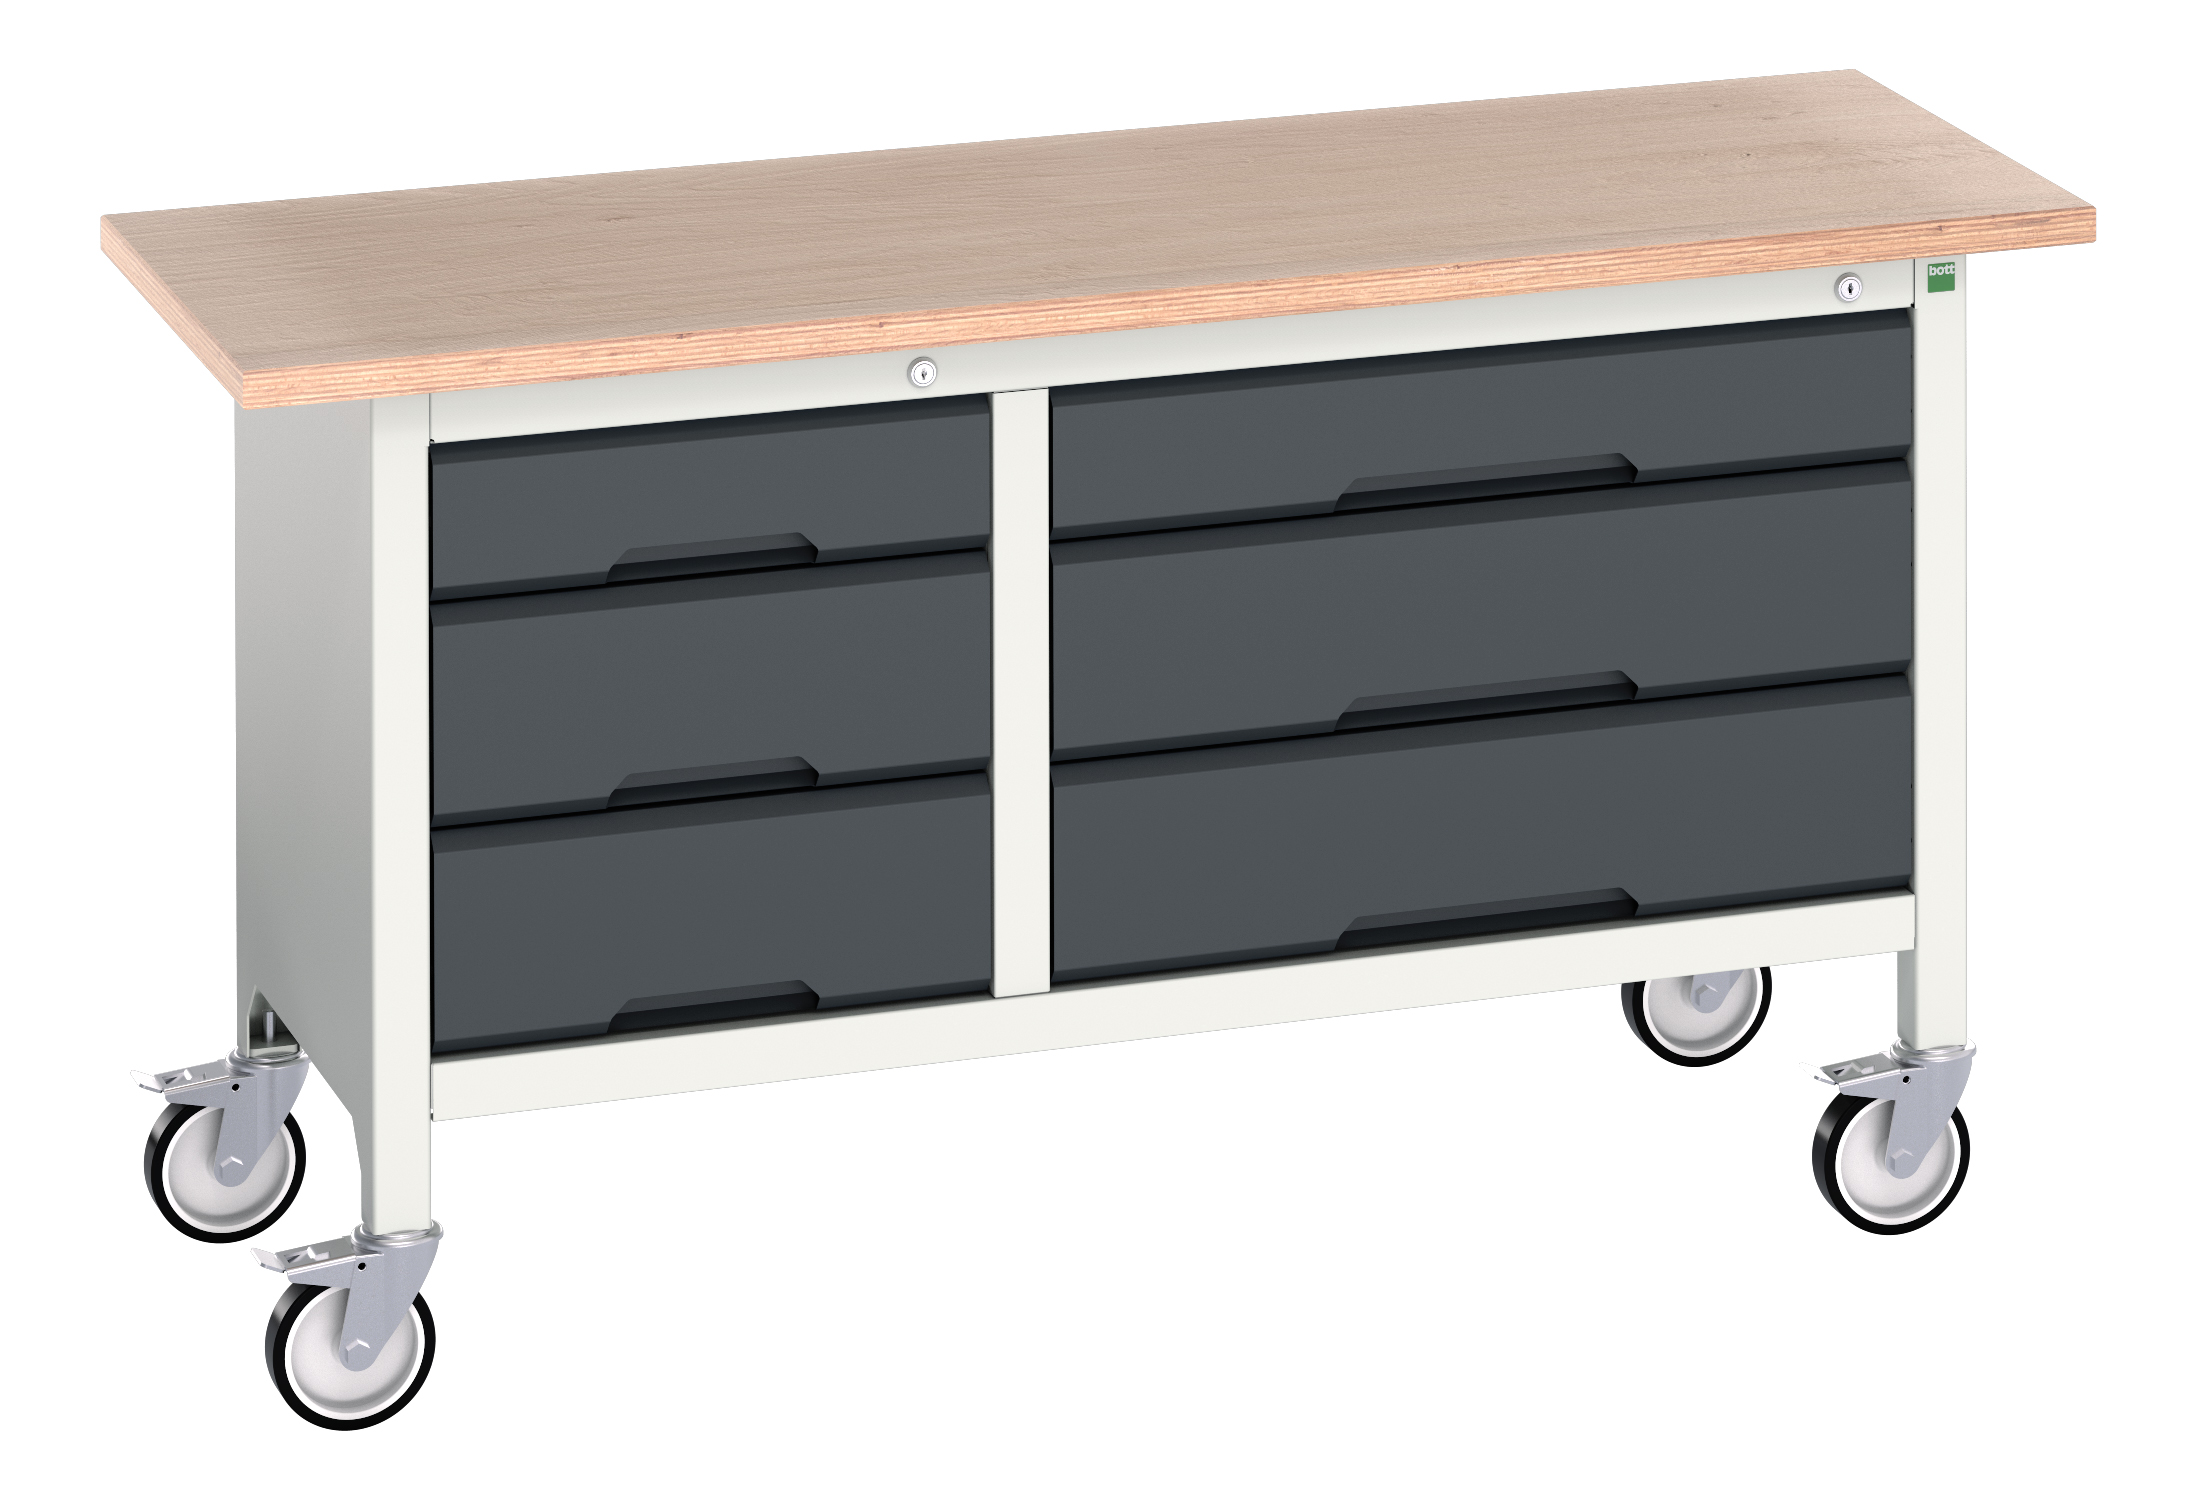 Bott Verso Mobile Storage Bench With 3 Drawer Cabinet / 3 Drawer Cabinet - 16923215.19